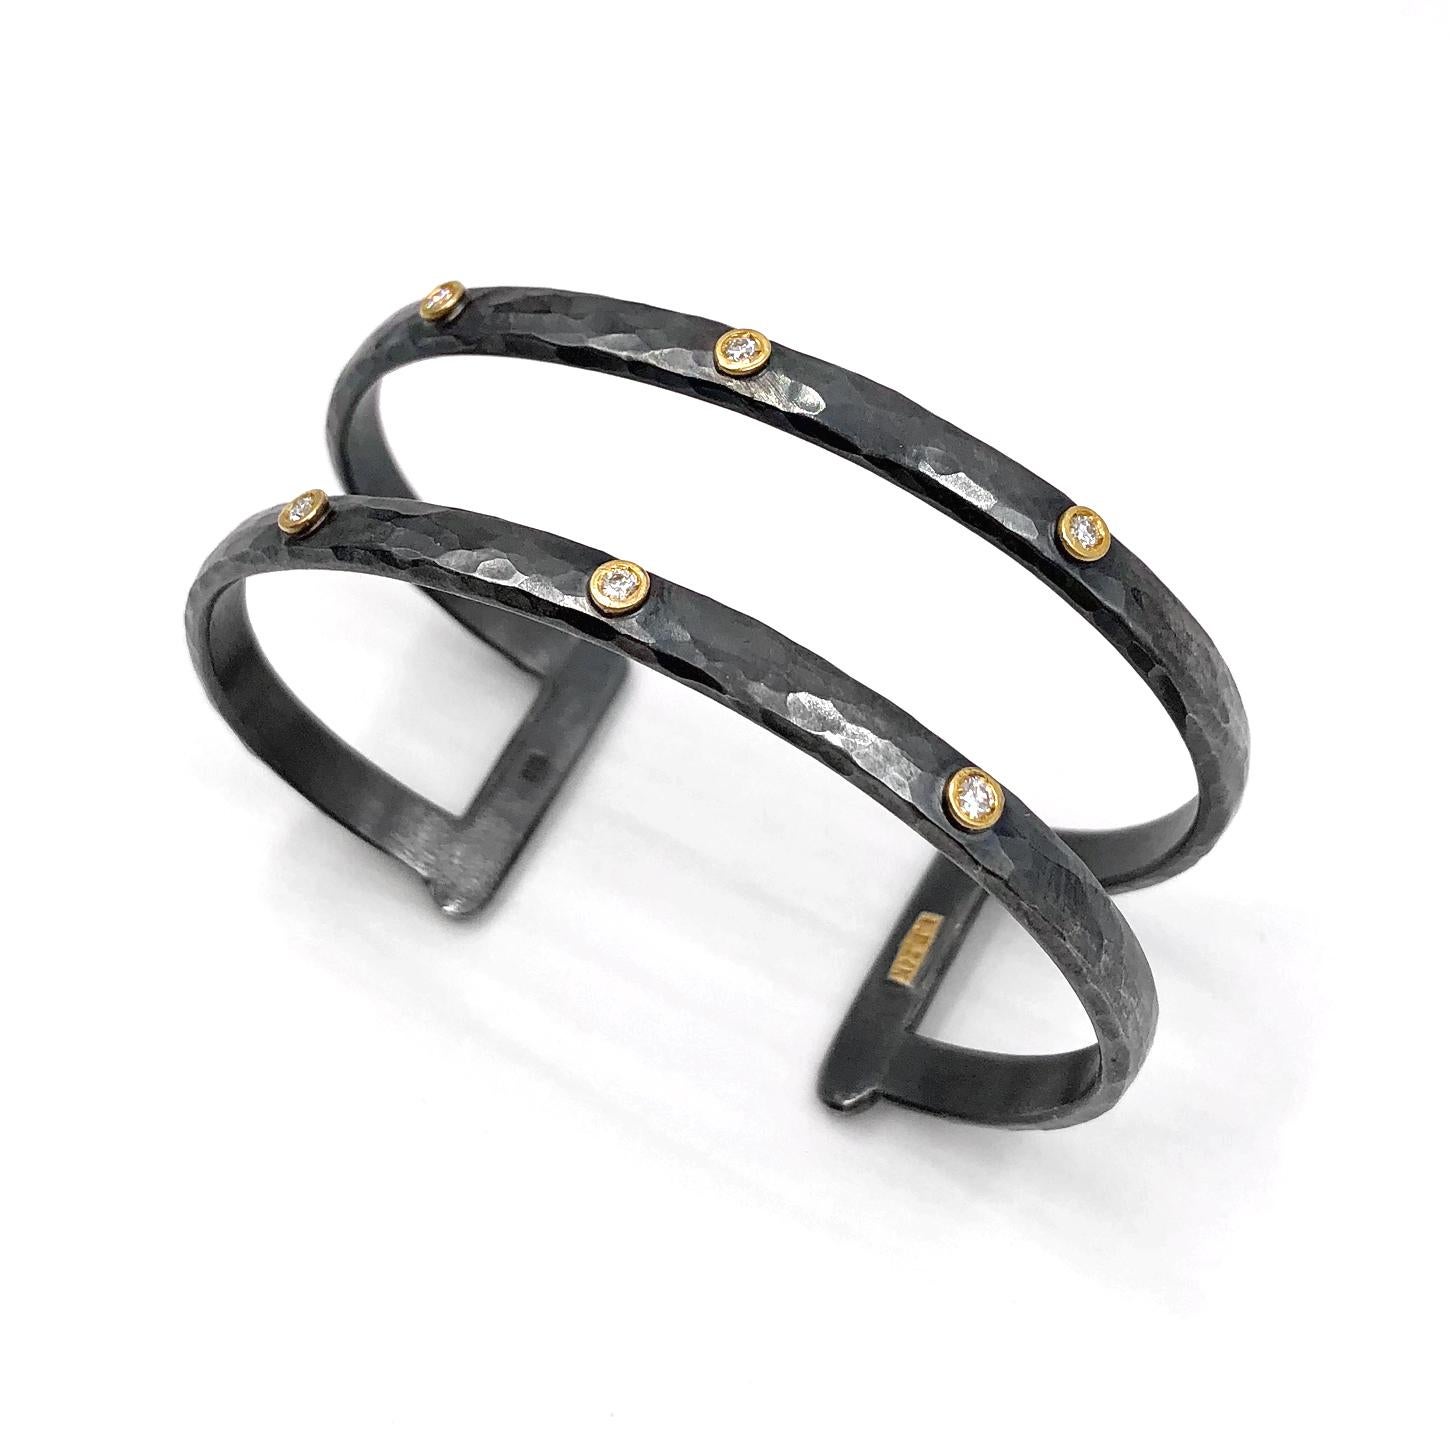 Double Open Cuff Bracelet handcrafted by acclaimed jewelry artist Lika Behar featuring six round brilliant-cut white diamonds totaling 0.20 carats, individually bezel-set in 24k gold and attached to an oxidized sterling silver cuff.  Stamped LIKA